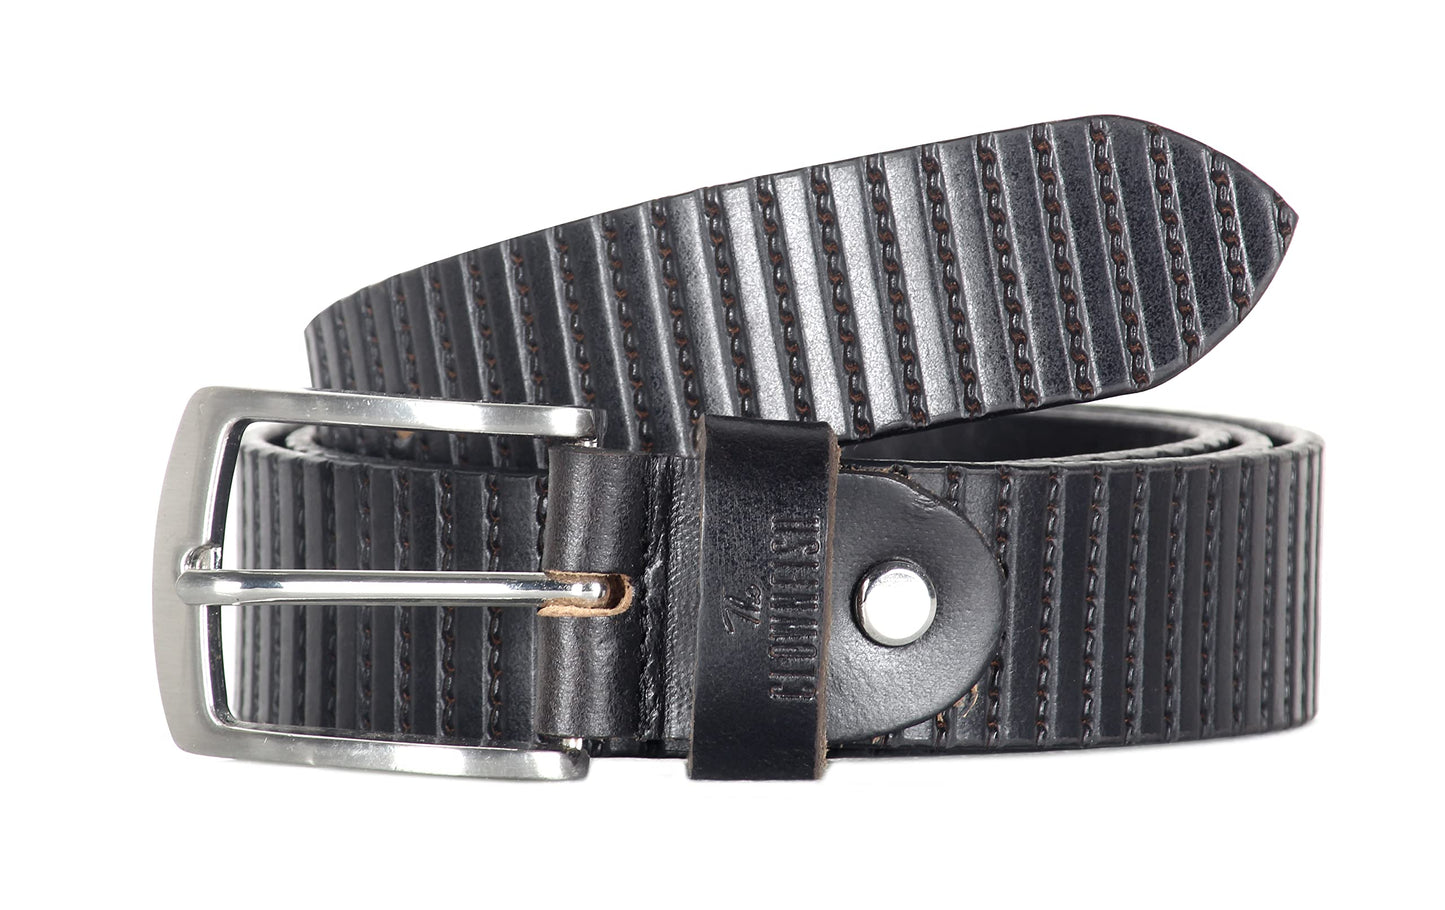 THE CLOWNFISH Men's Genuine Leather Belt with Textured/Embossed Design-Soot Black-1 (Size-36 inches)